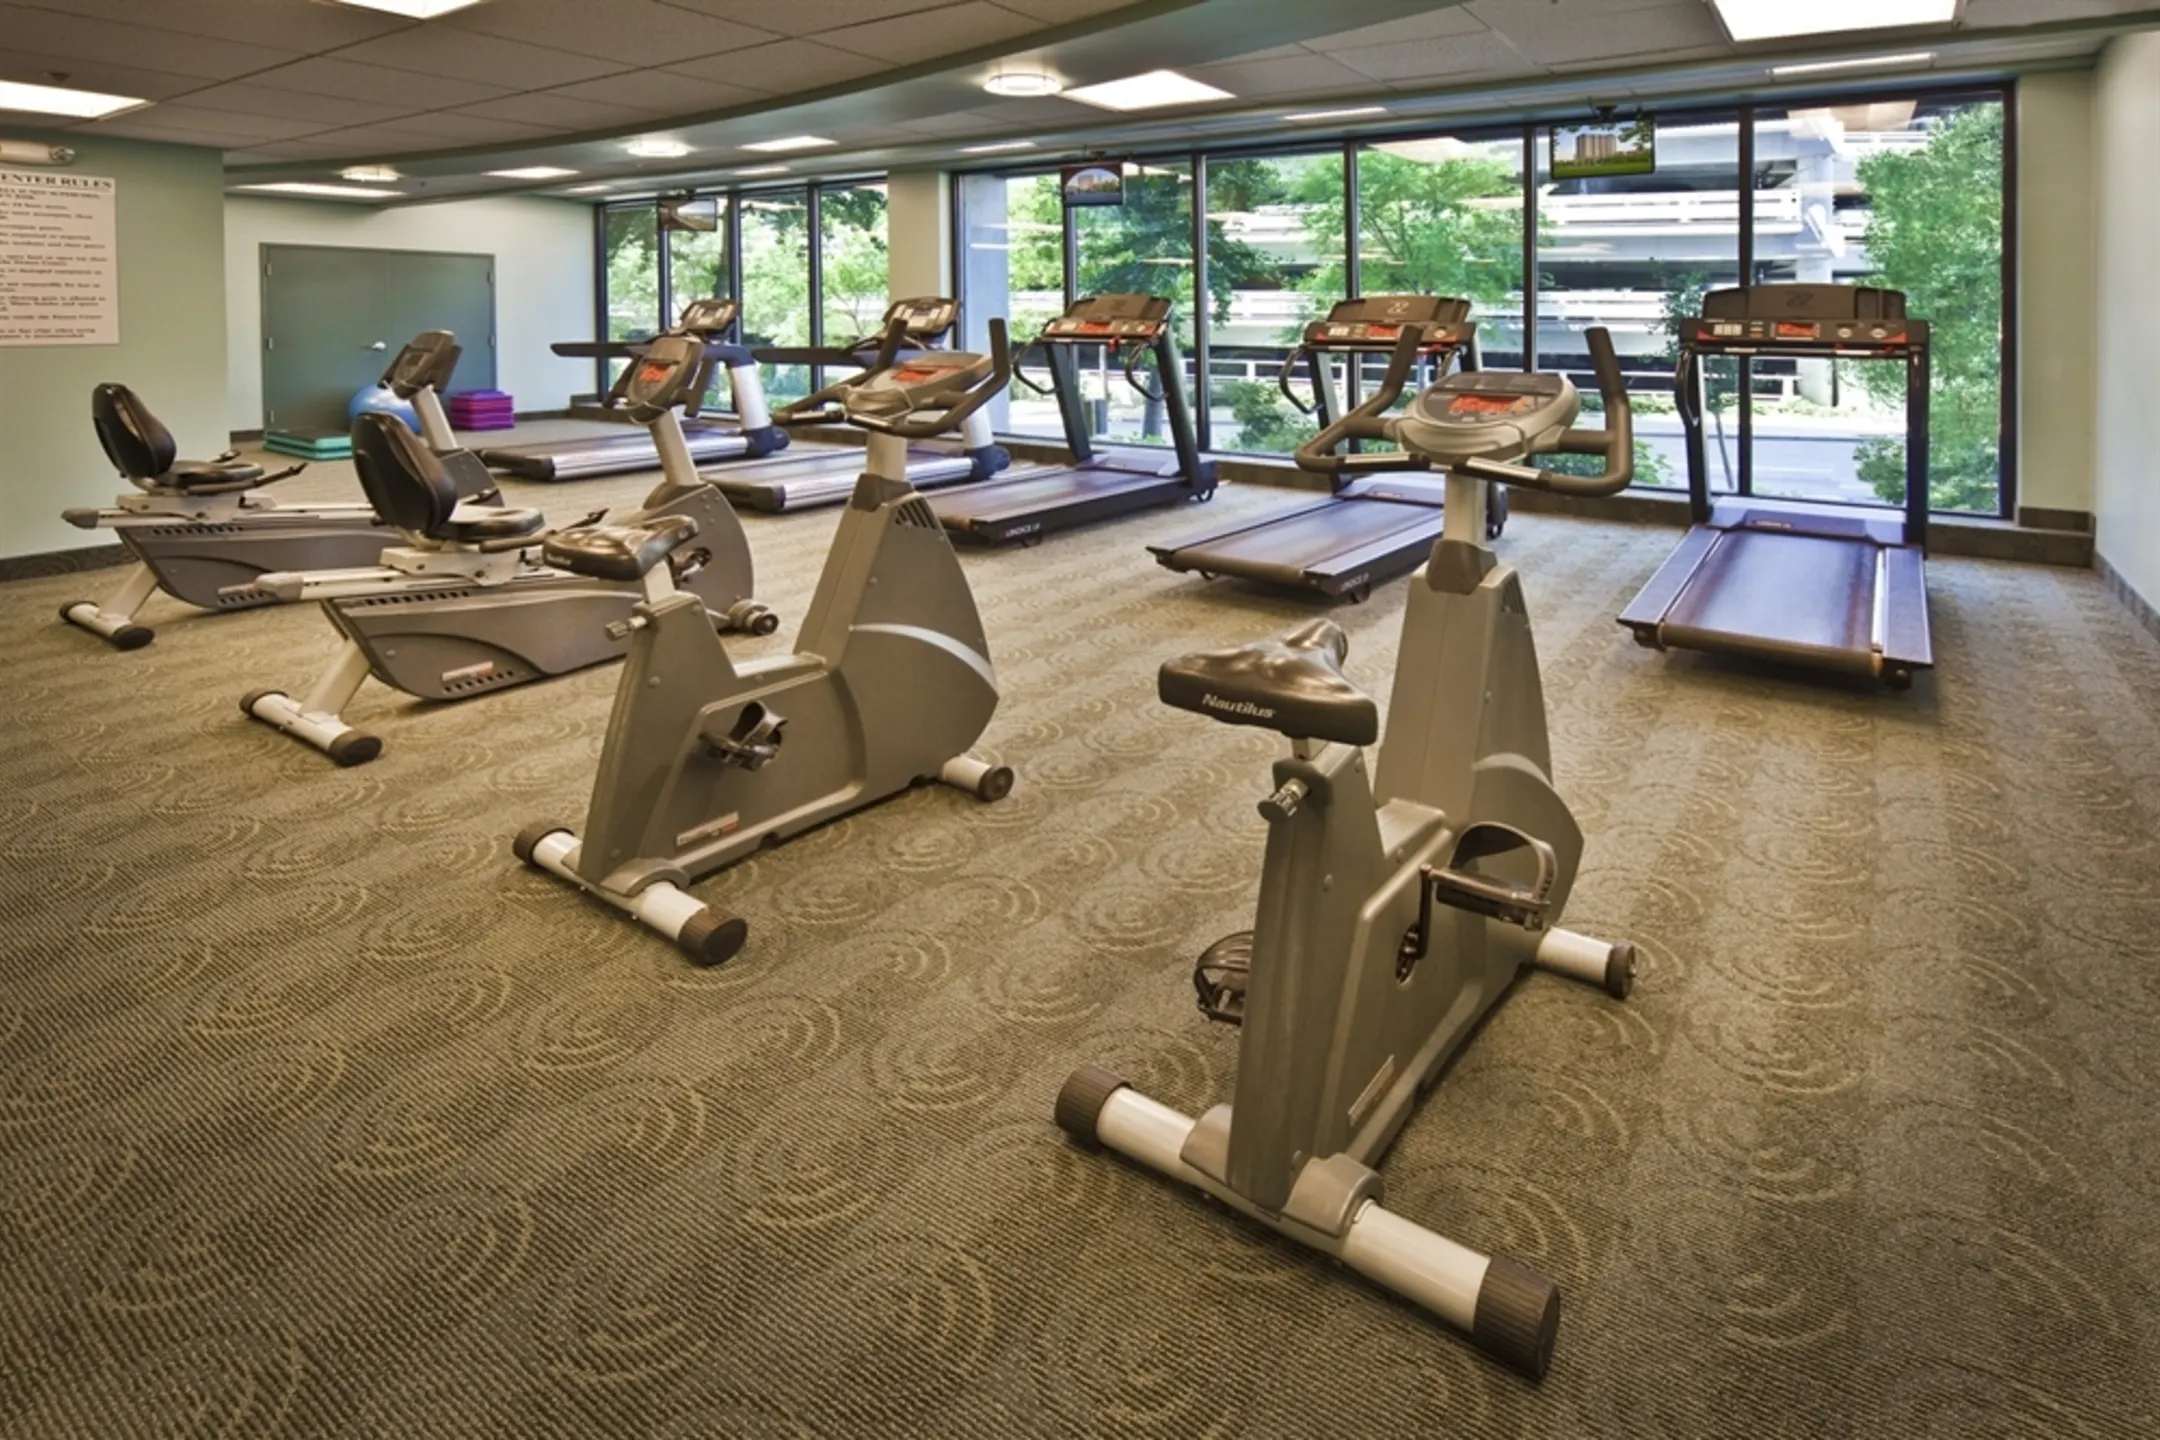 Fitness Weight Room - One Lytle Place Apartments - Cincinnati, OH